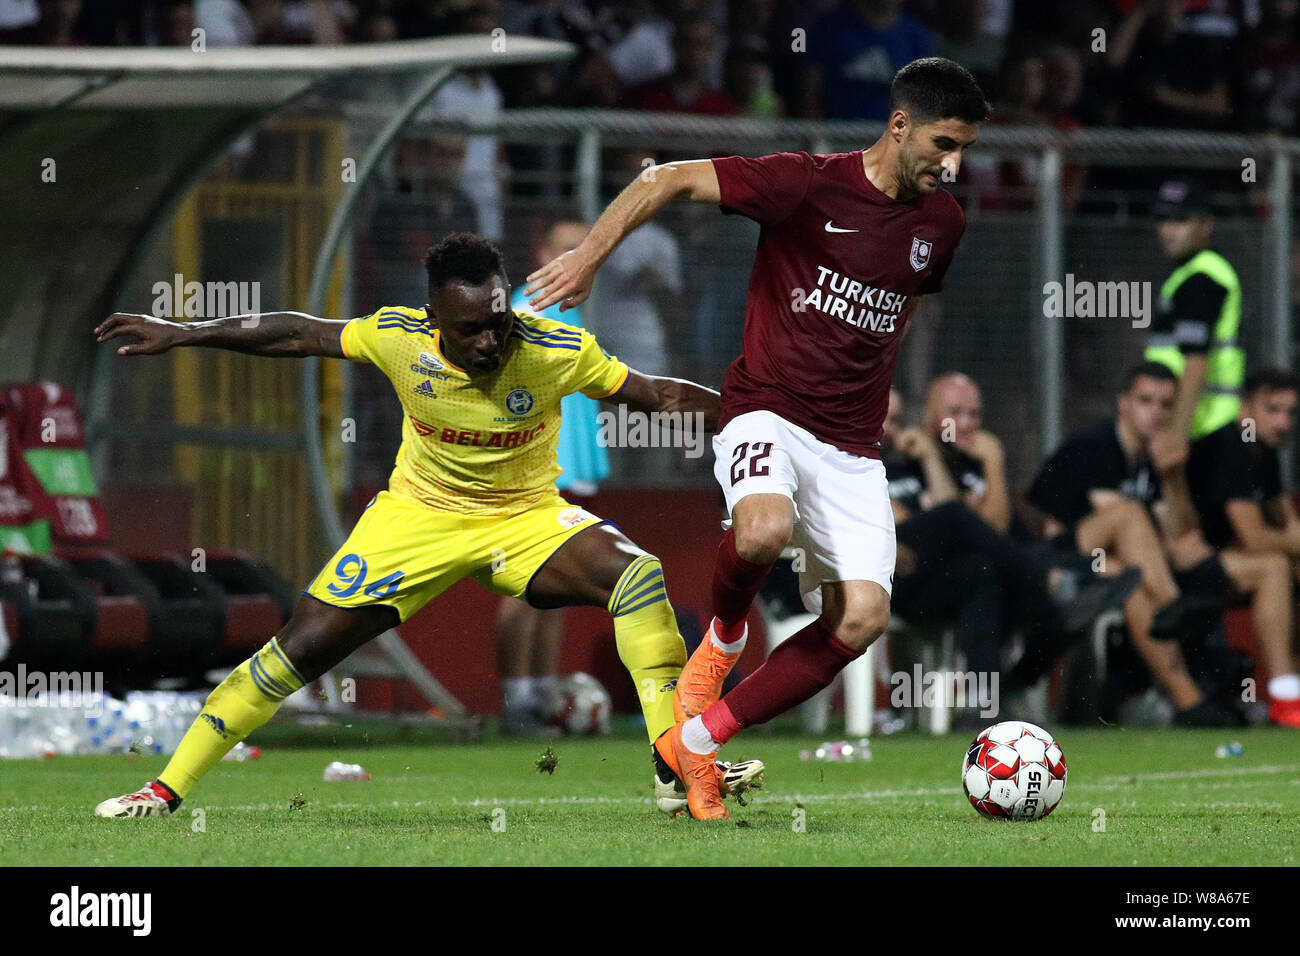 Zenica. 8th Aug, 2019. Bojan Letic (R) of Sarajevo vies with Hervaine Moukam of Bate Borisov during the third qualifying round match of UEFA Europa League between Sarajevo of Bosnia and Herzegovina and Bate Borisov of Belarus in Zenica, Bosnia and Herzegovina on Aug. 8, 2019. Bate Borisov won 2-1. Credit: Nedim Grabovica/Xinhua/Alamy Live News Stock Photo